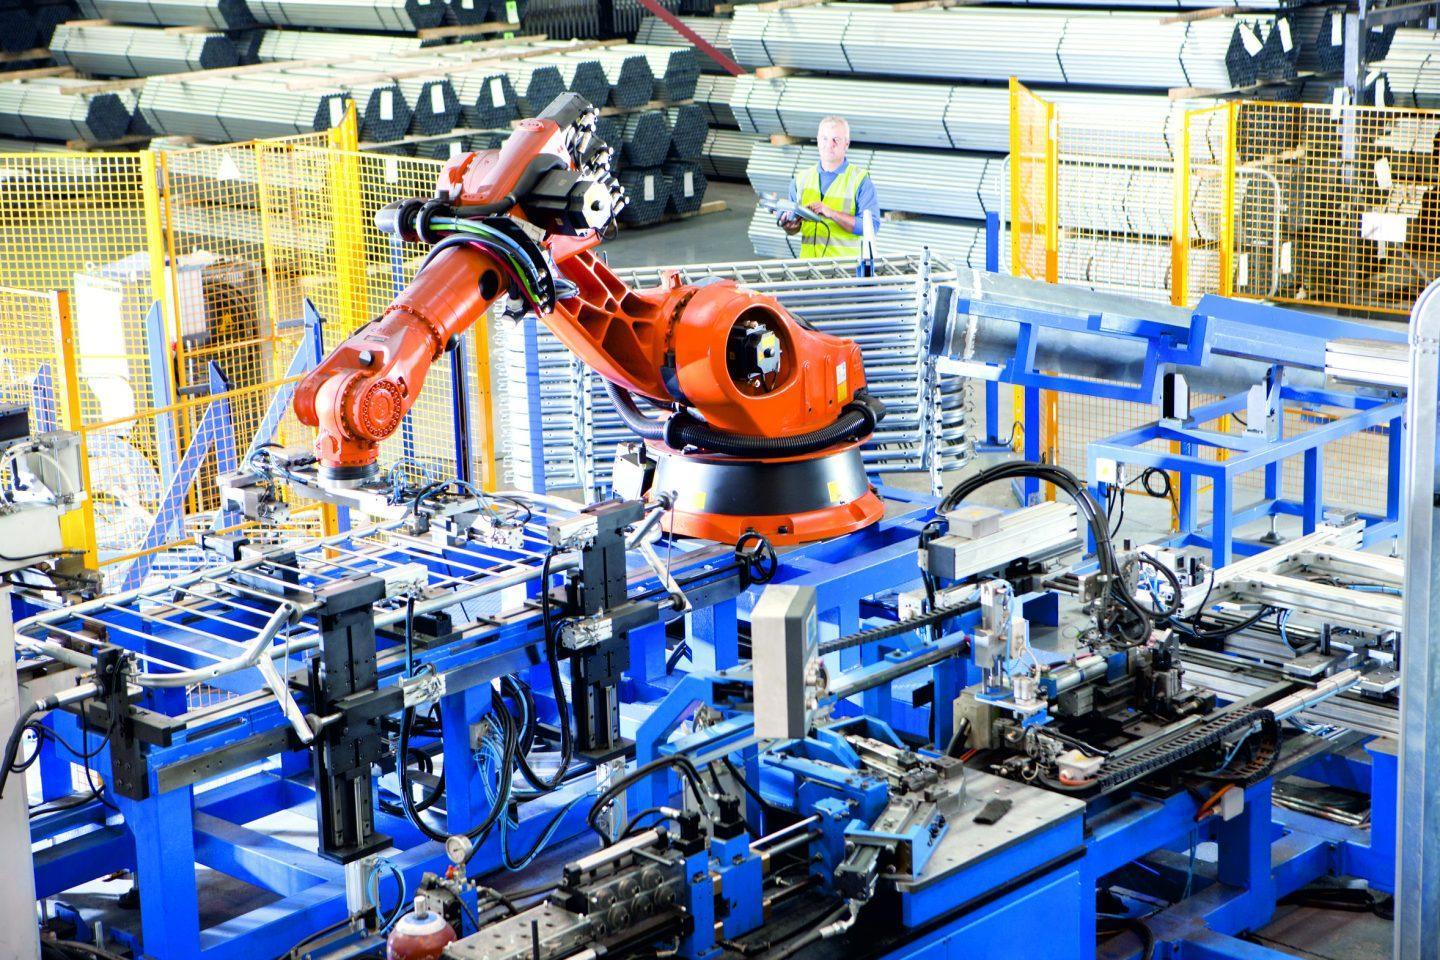 Application example of industrial automation